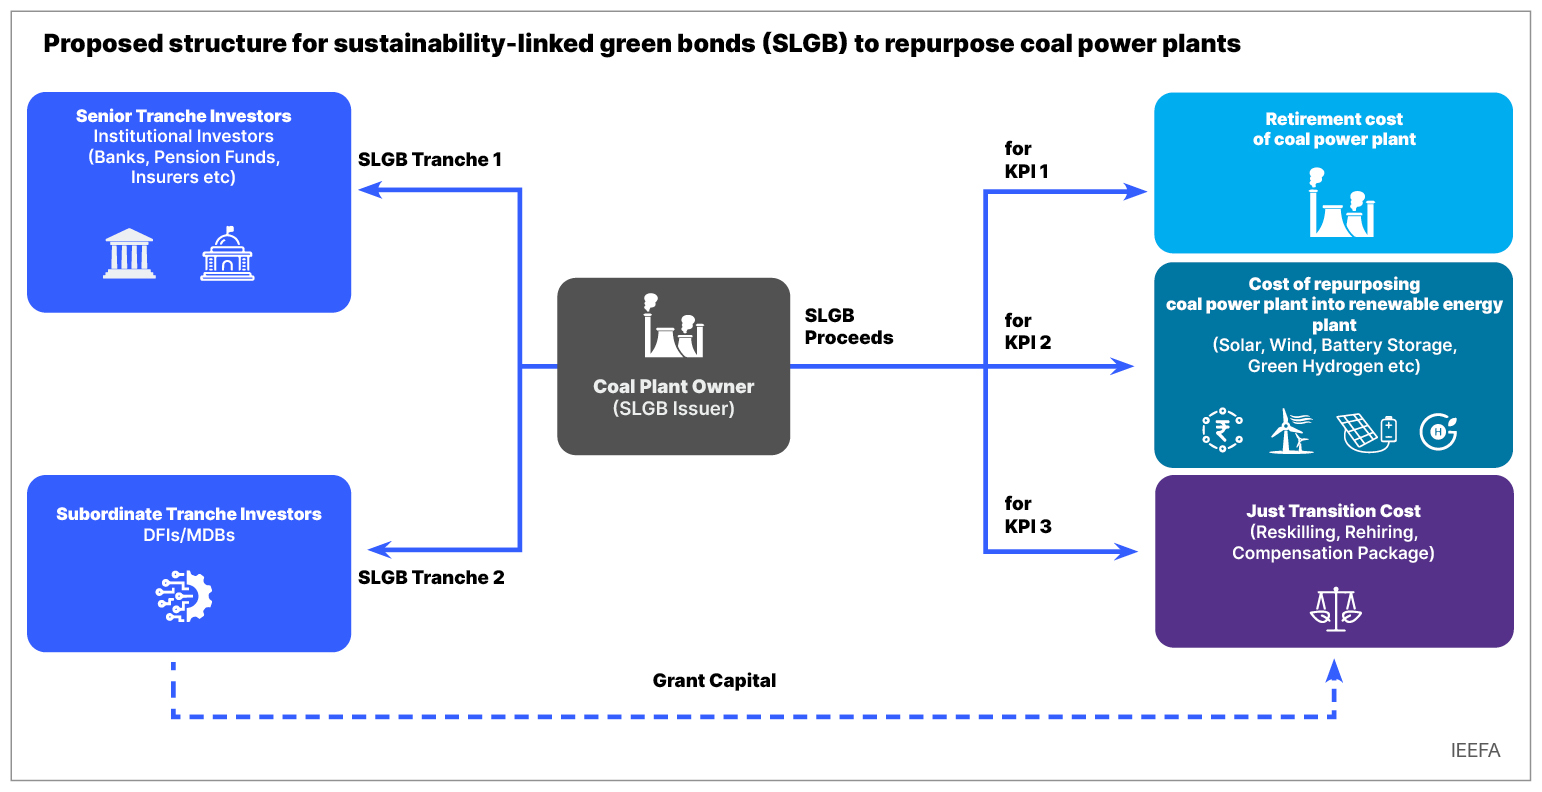 Proposed structure for sustainability linked green bonds to reporpose coal power plants